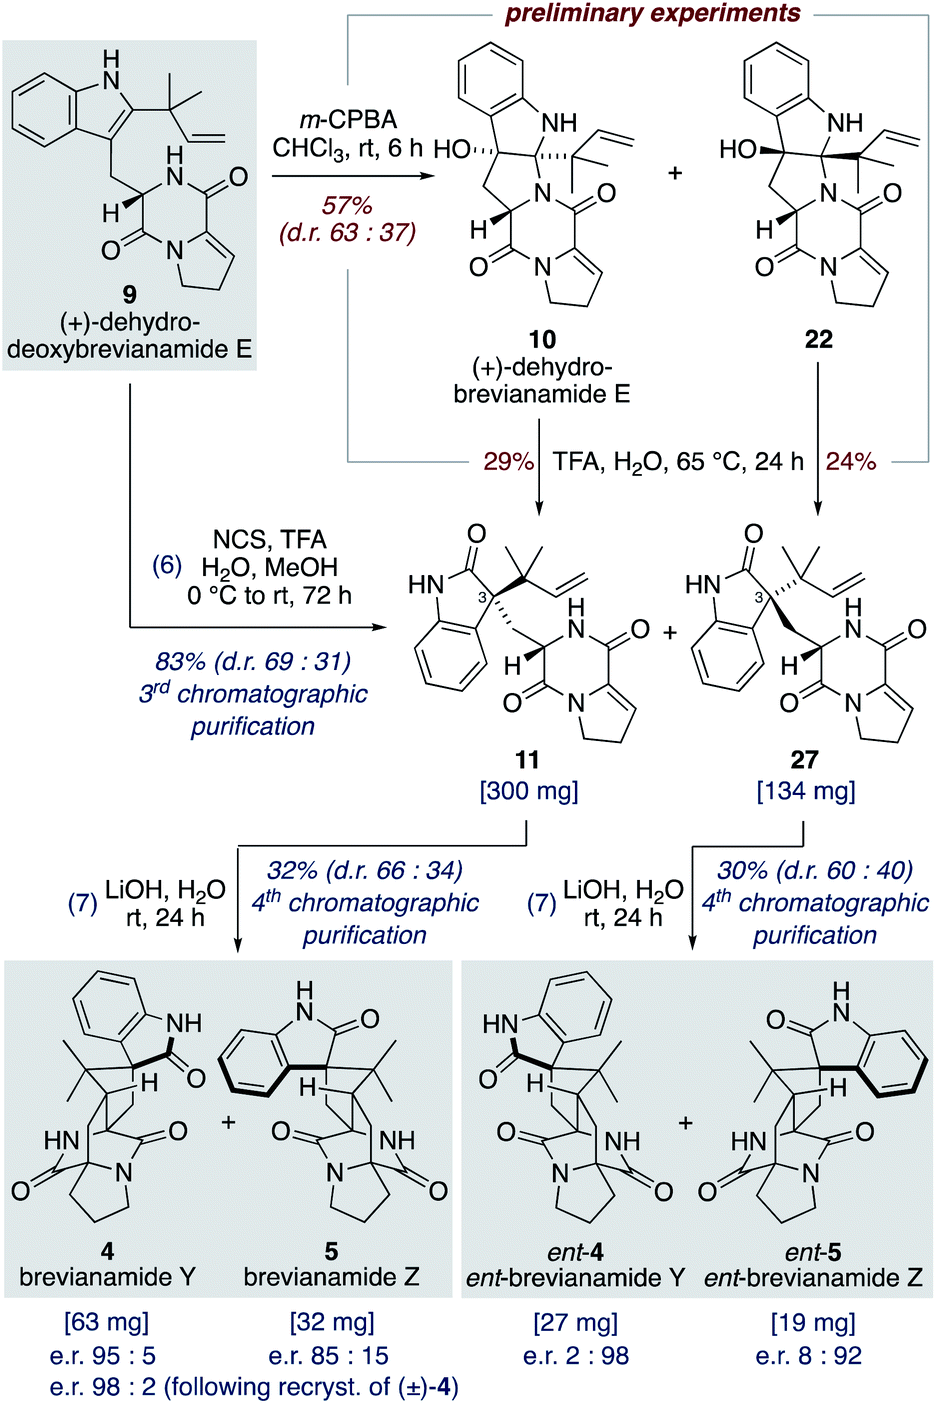 Unified total synthesis of the brevianamide alkaloids enabled by 